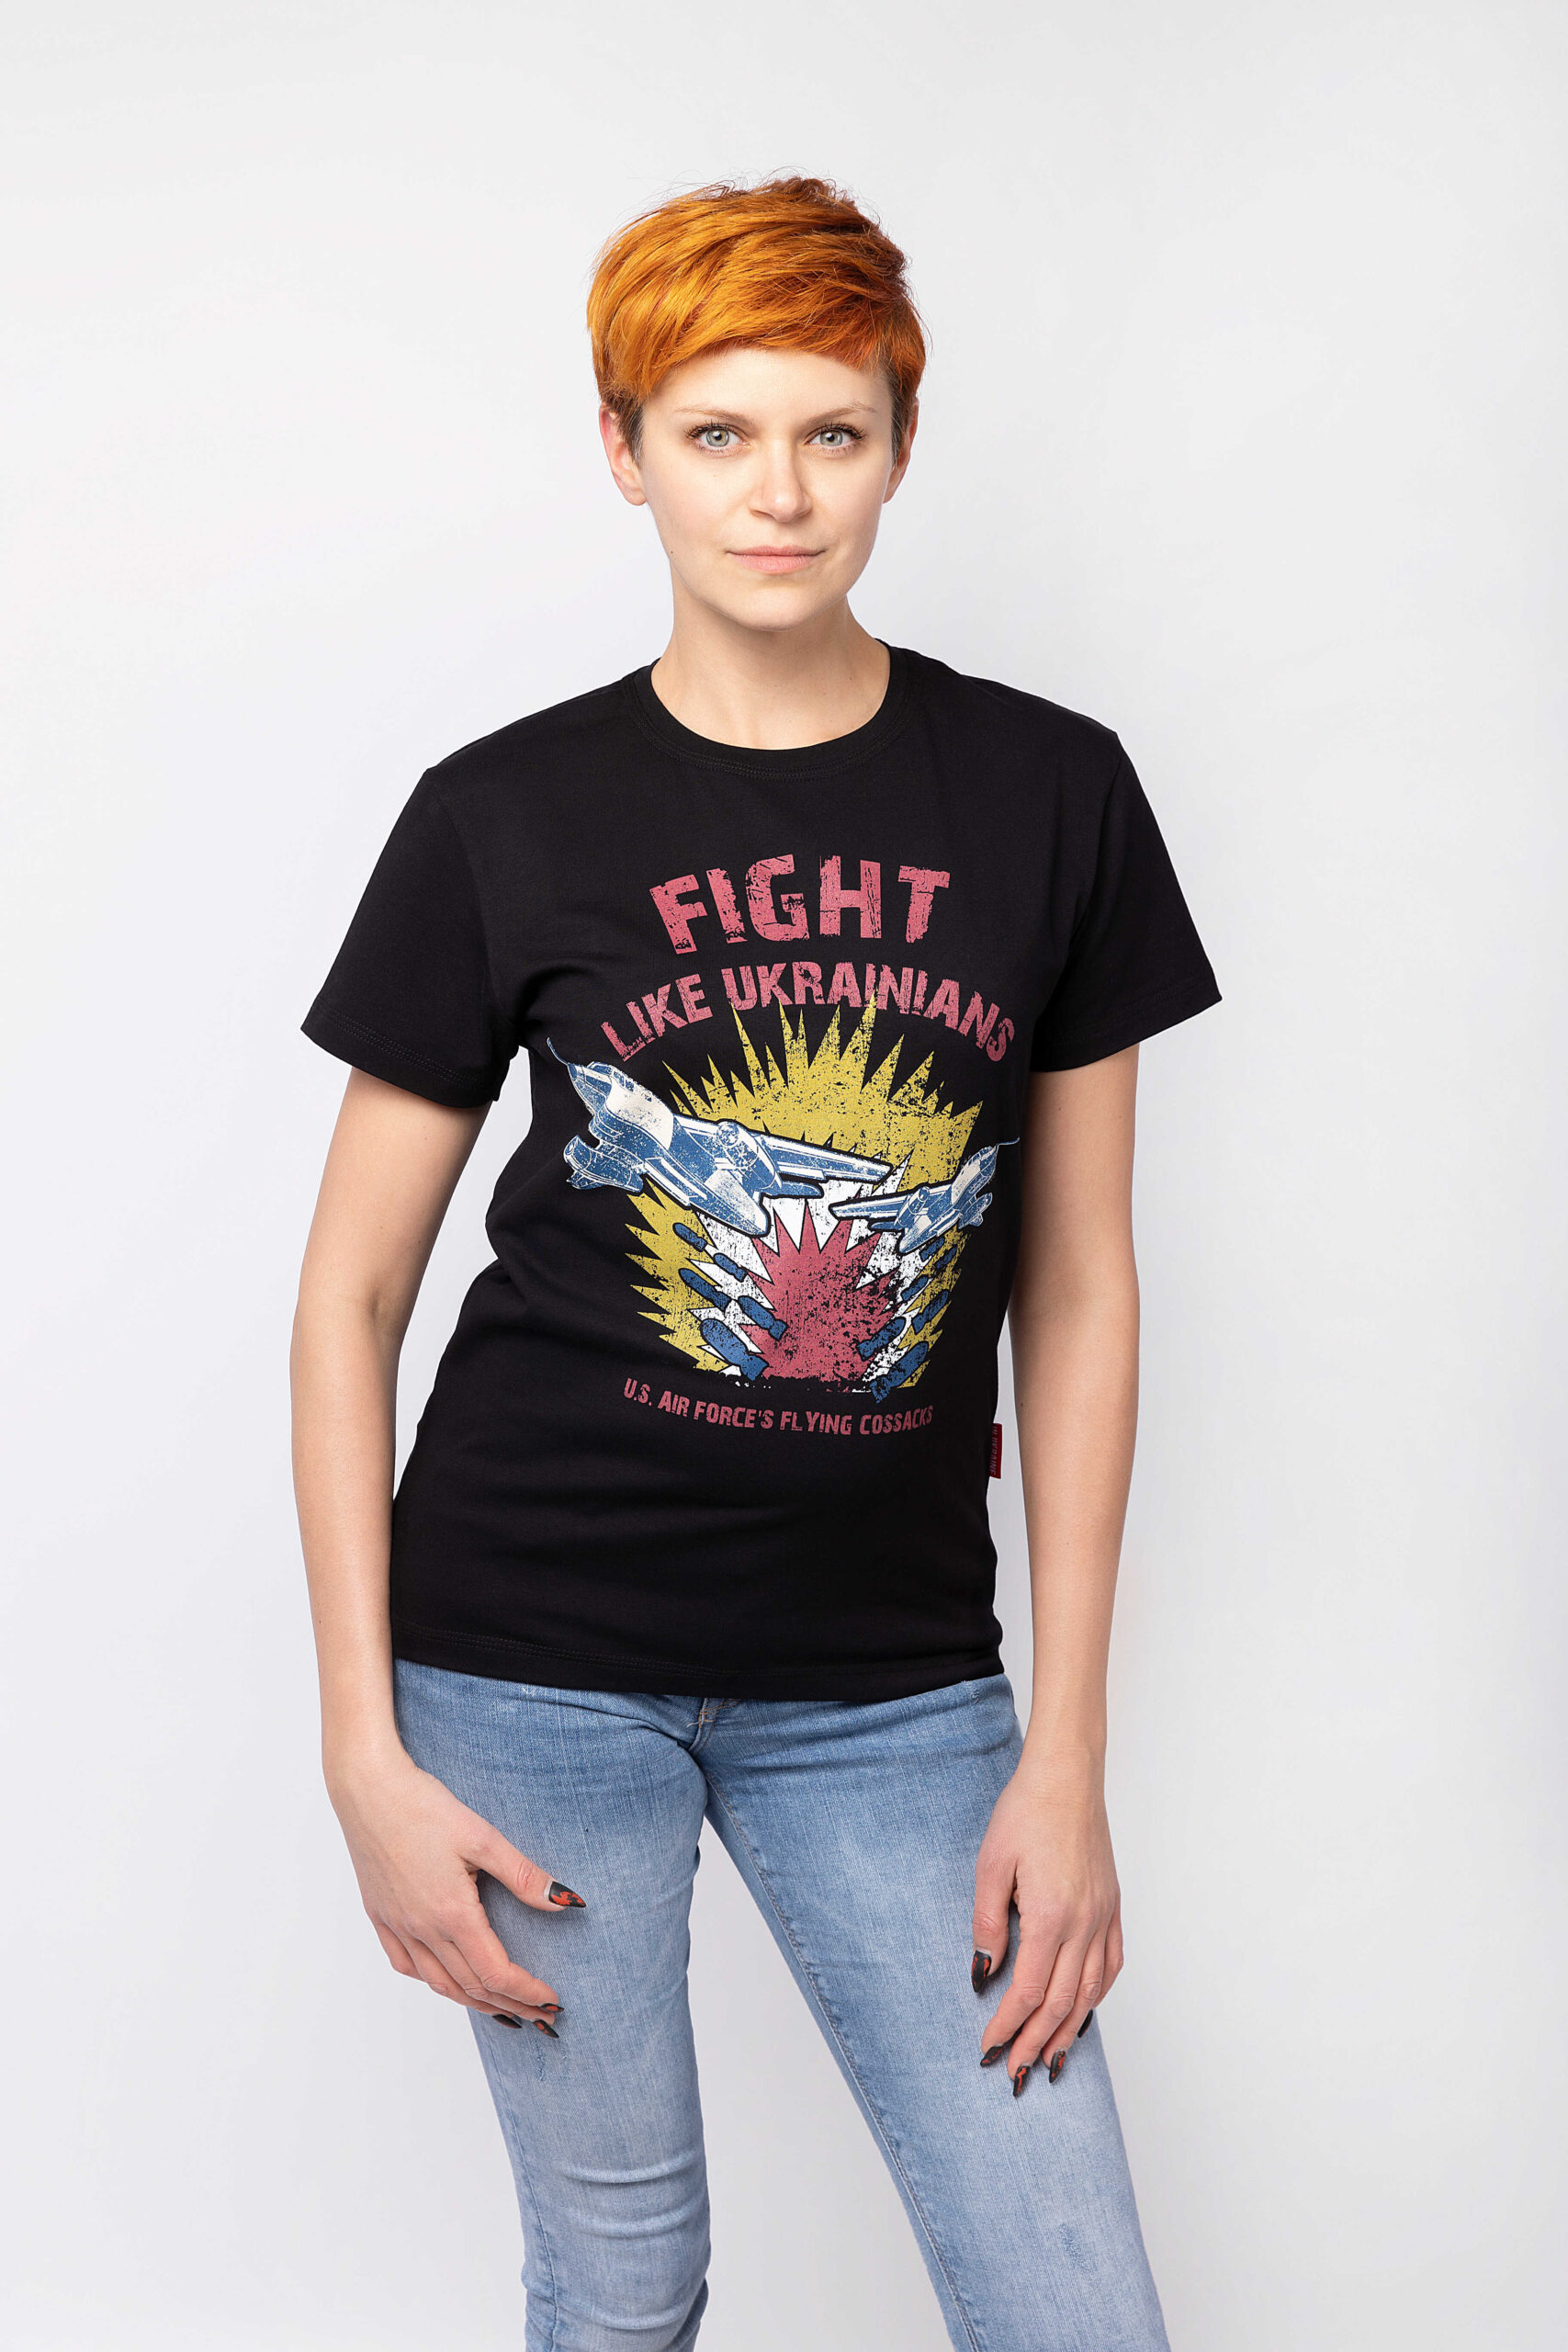 Women's T-Shirt Fight Like Ukrainians. Color black. All income is directed to support 